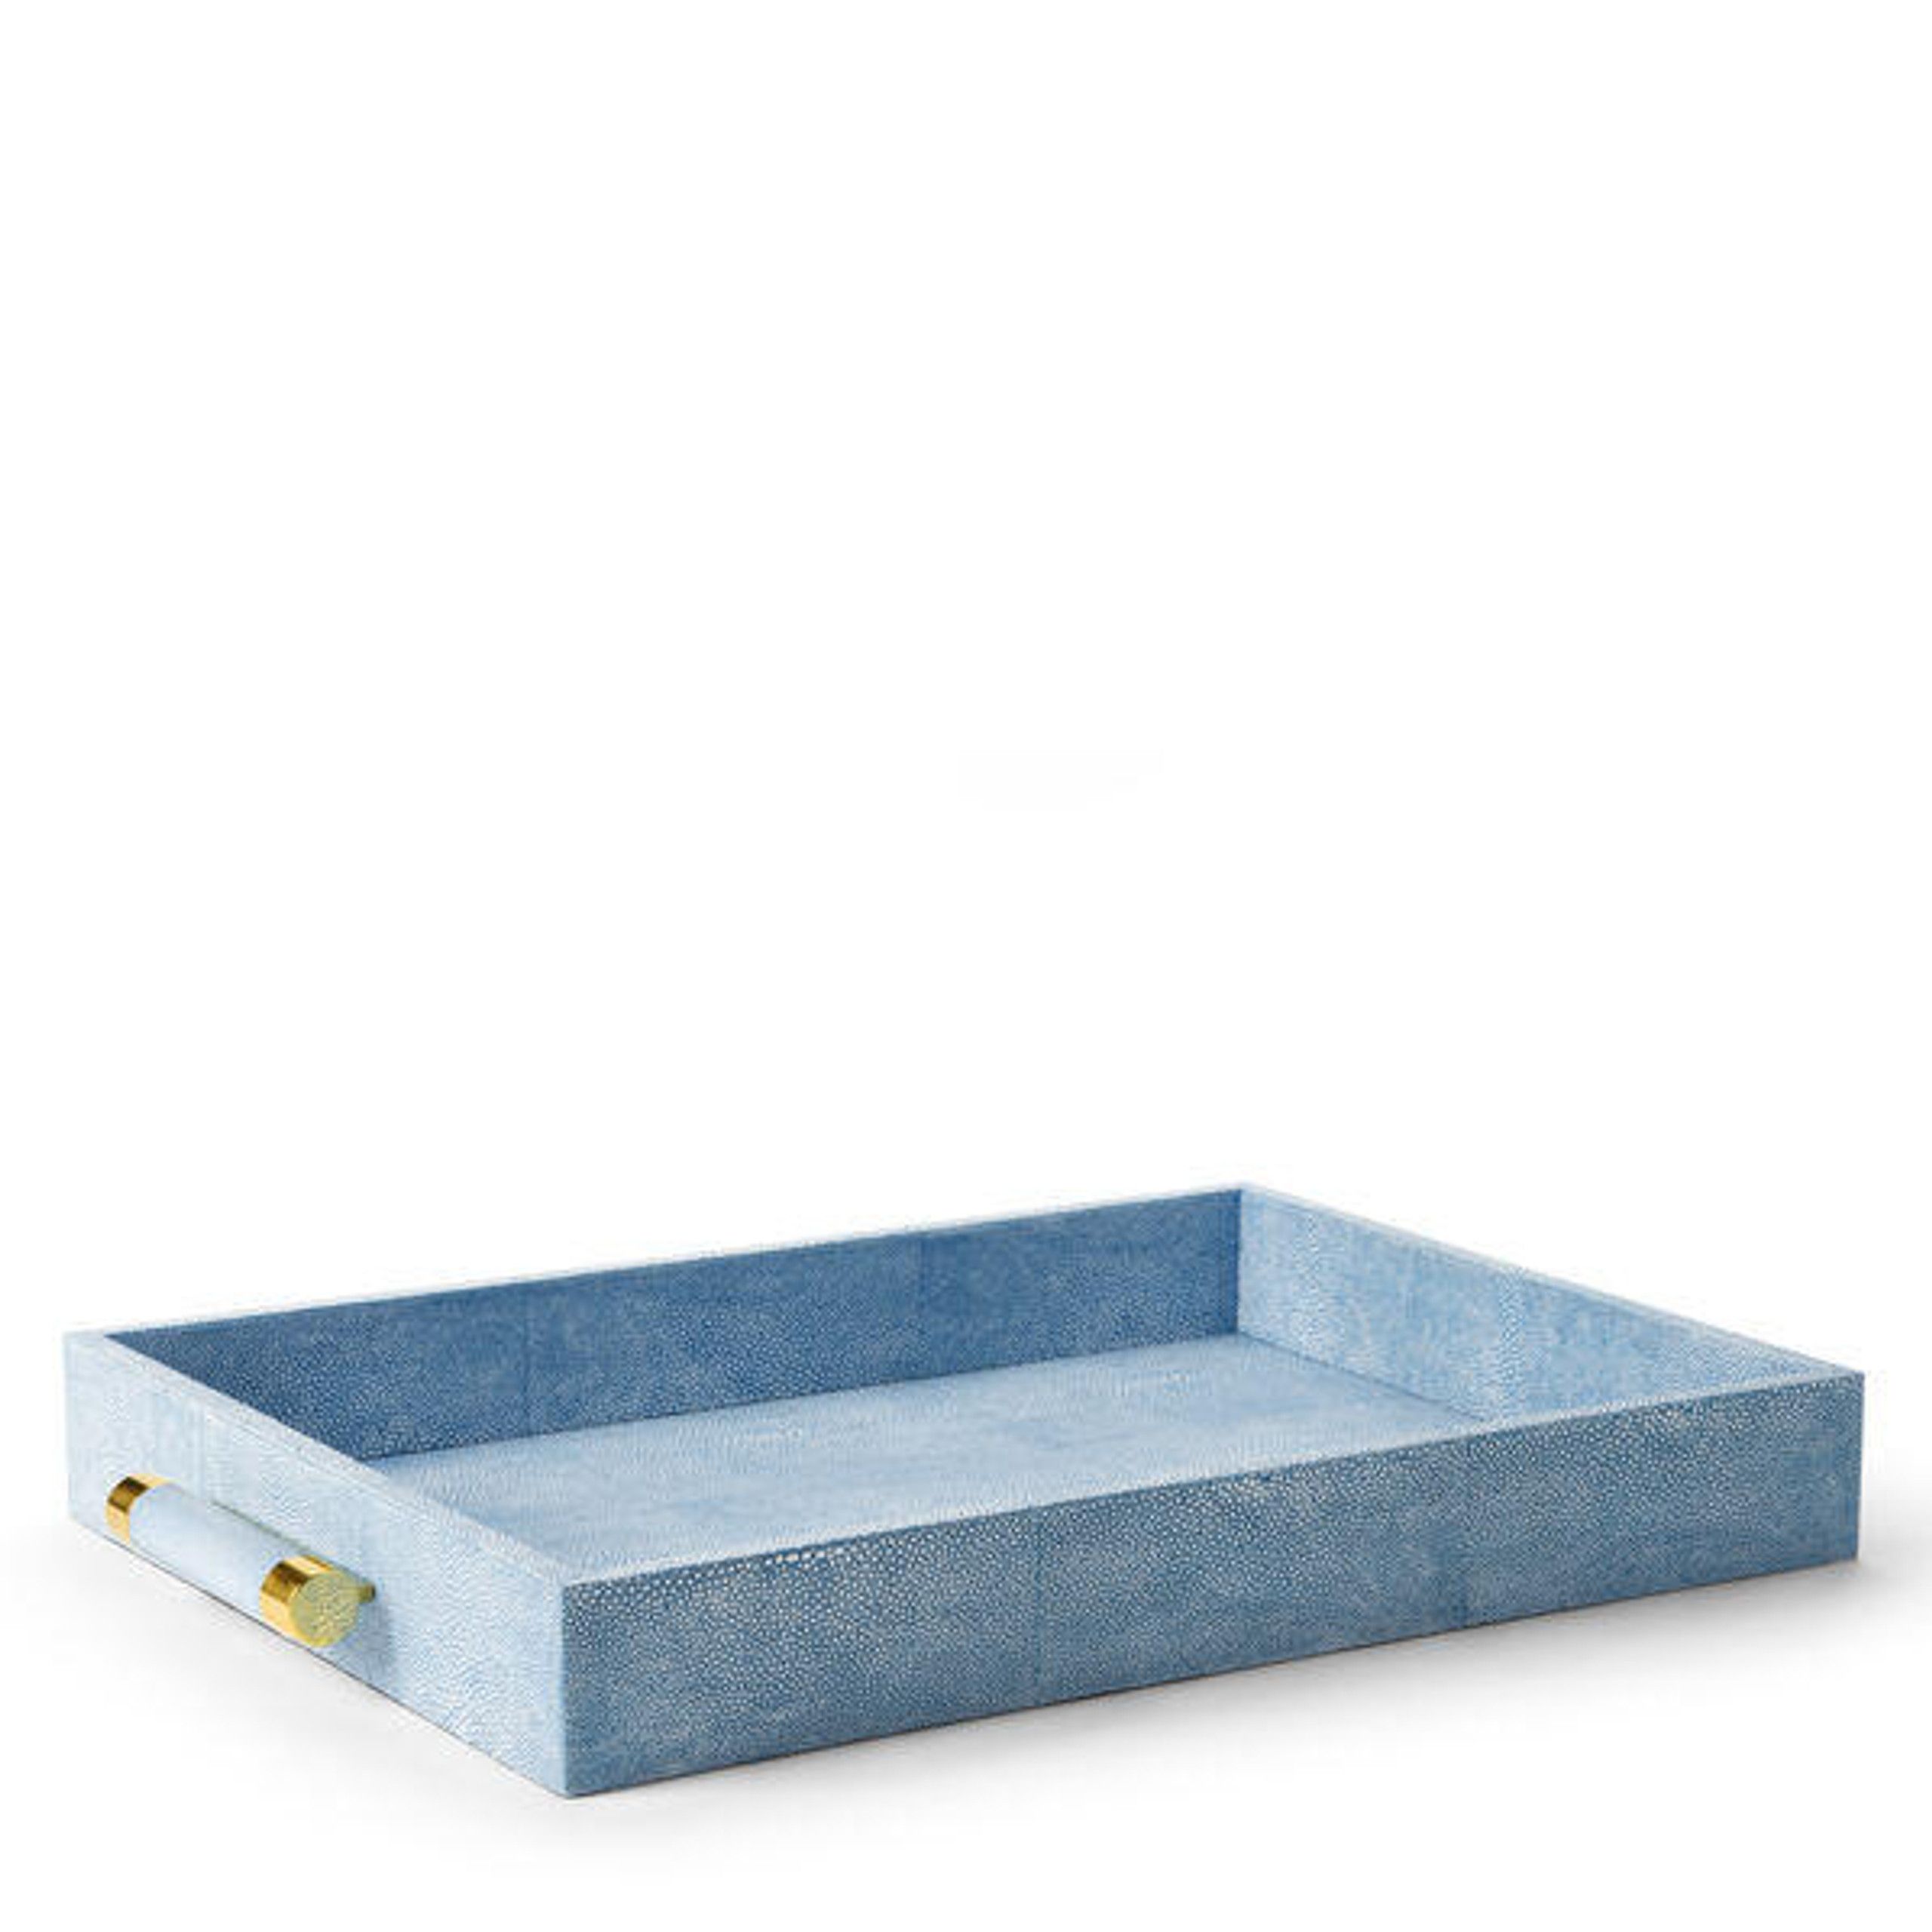 Classic Shagreen Serving Tray
                    
    
        
    
    
        
            
... | Belle and June